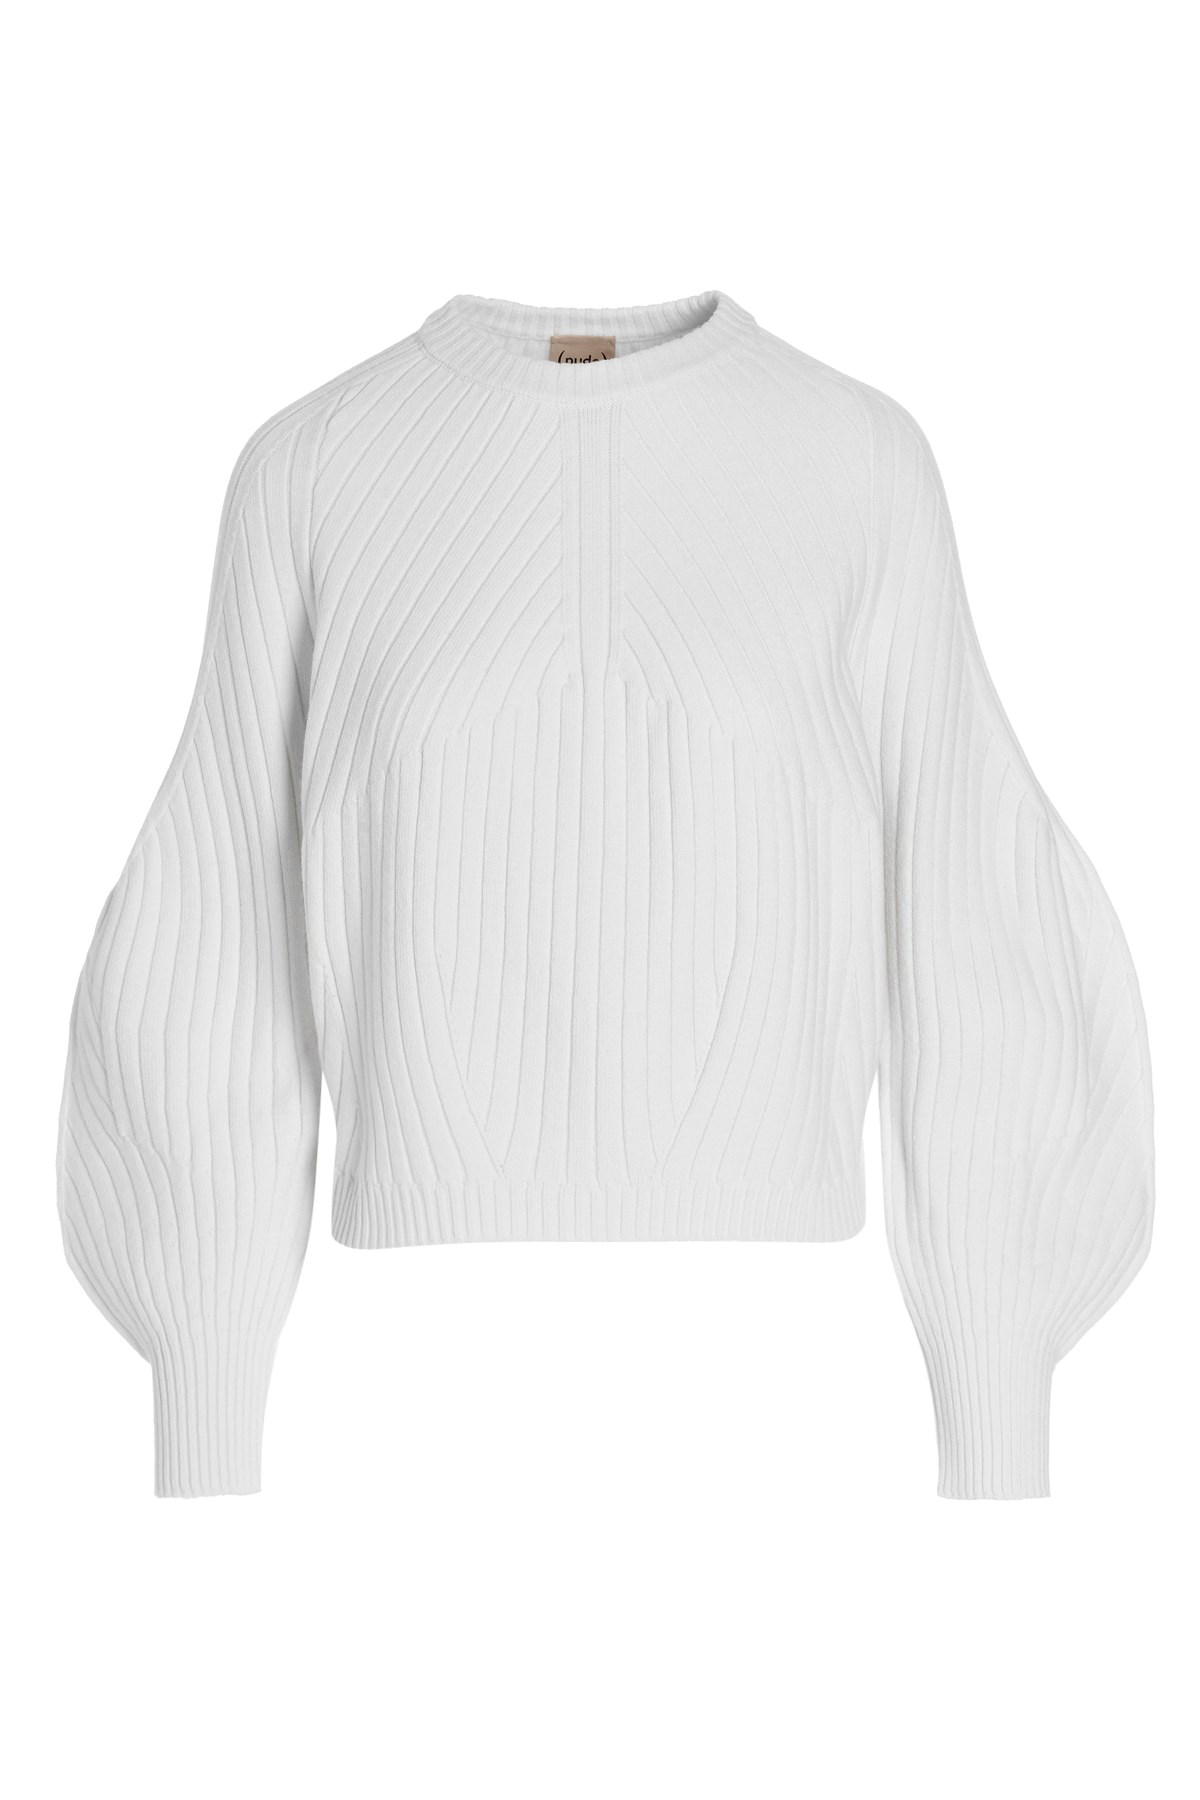 NUDE Gerippter Wollpullover